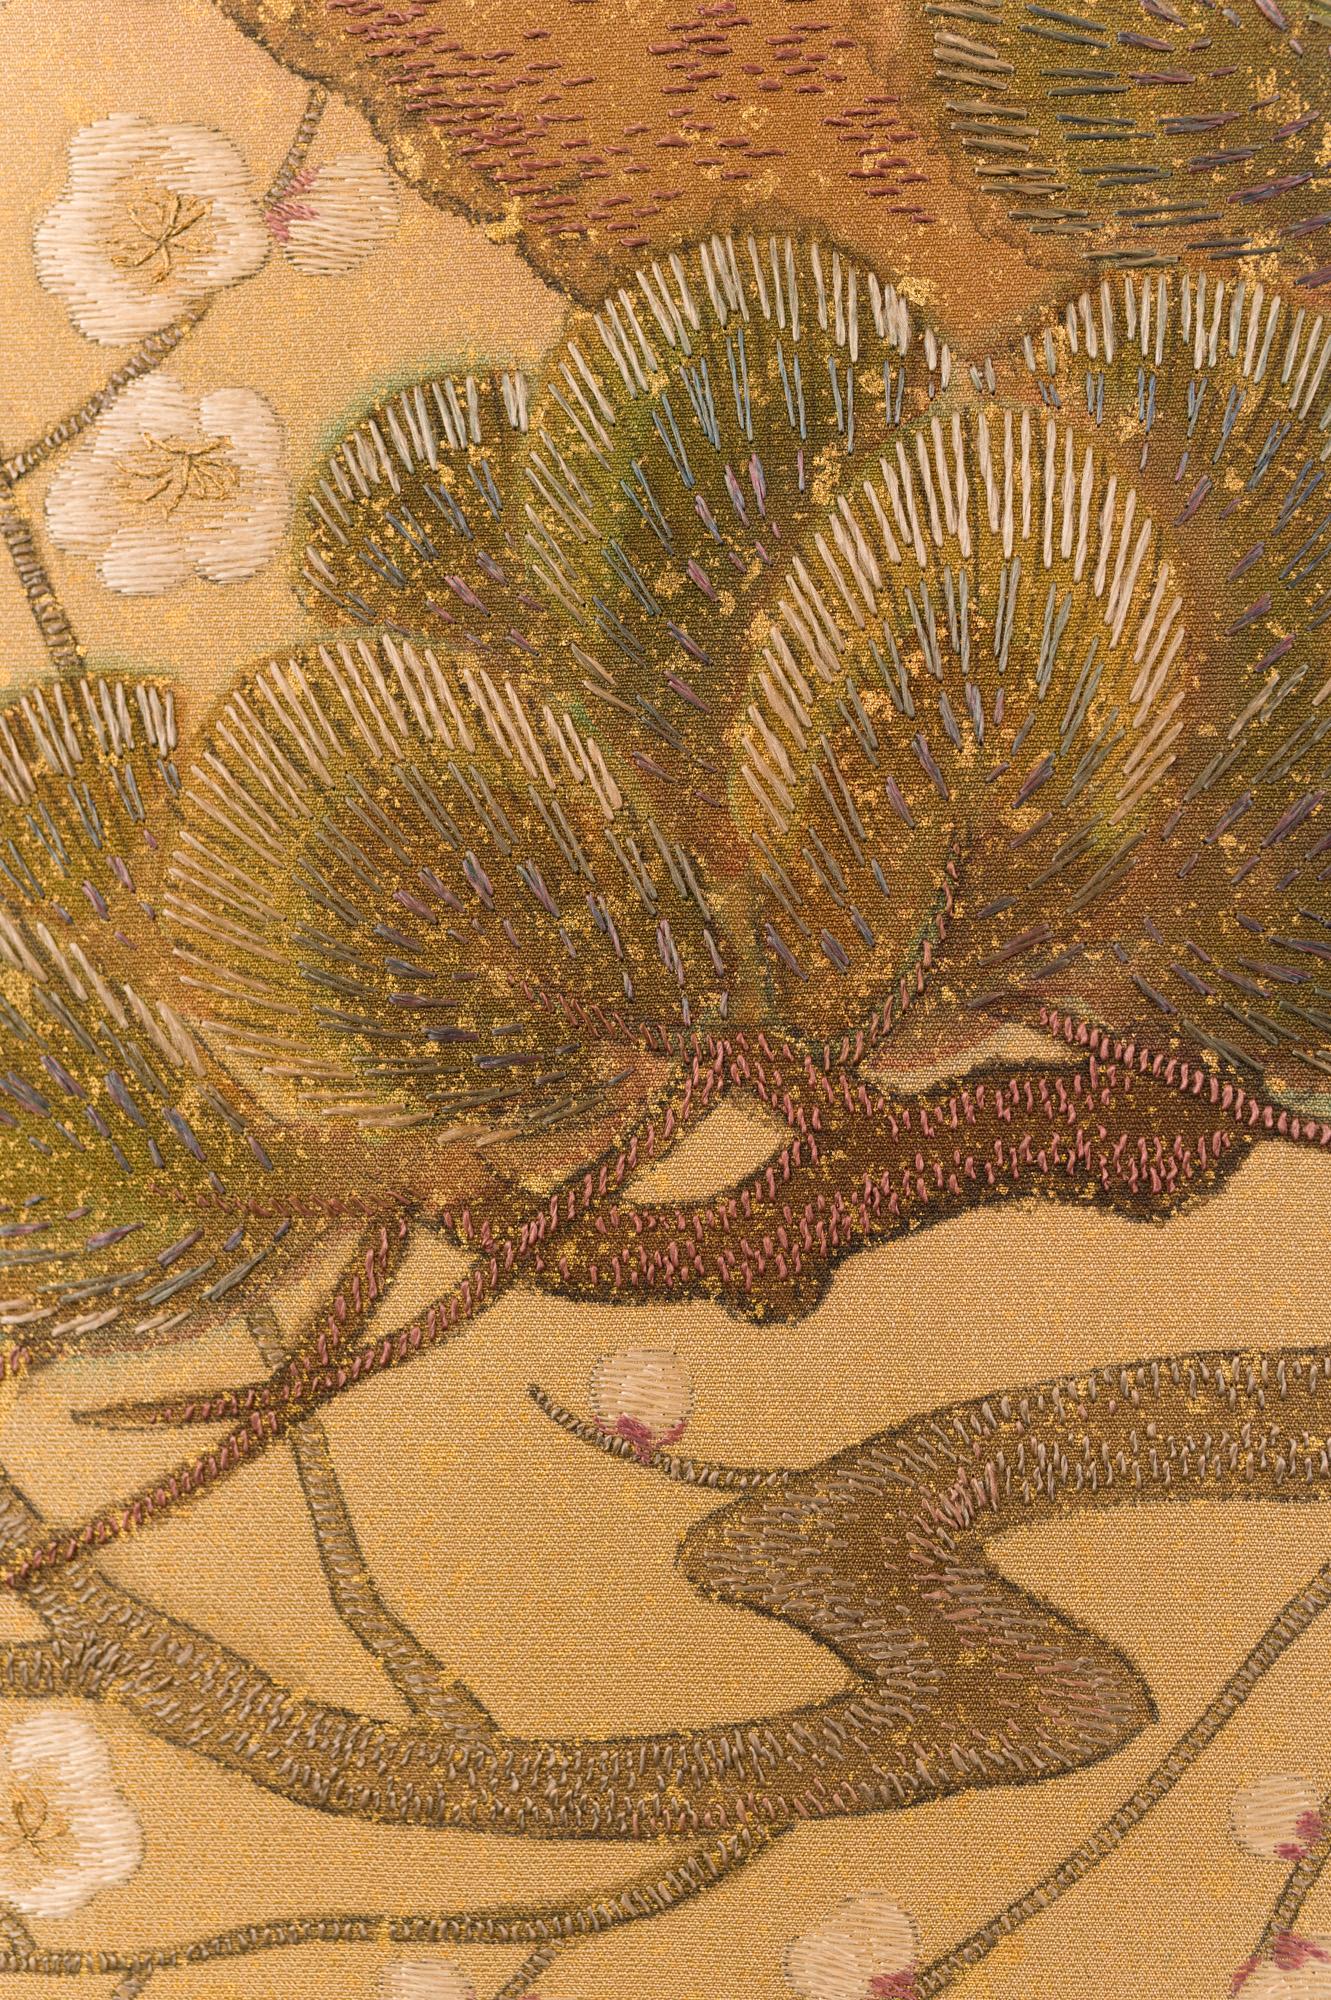 Japanese Two-Panel Screen, Embroidered Pine at Water's Edge 5